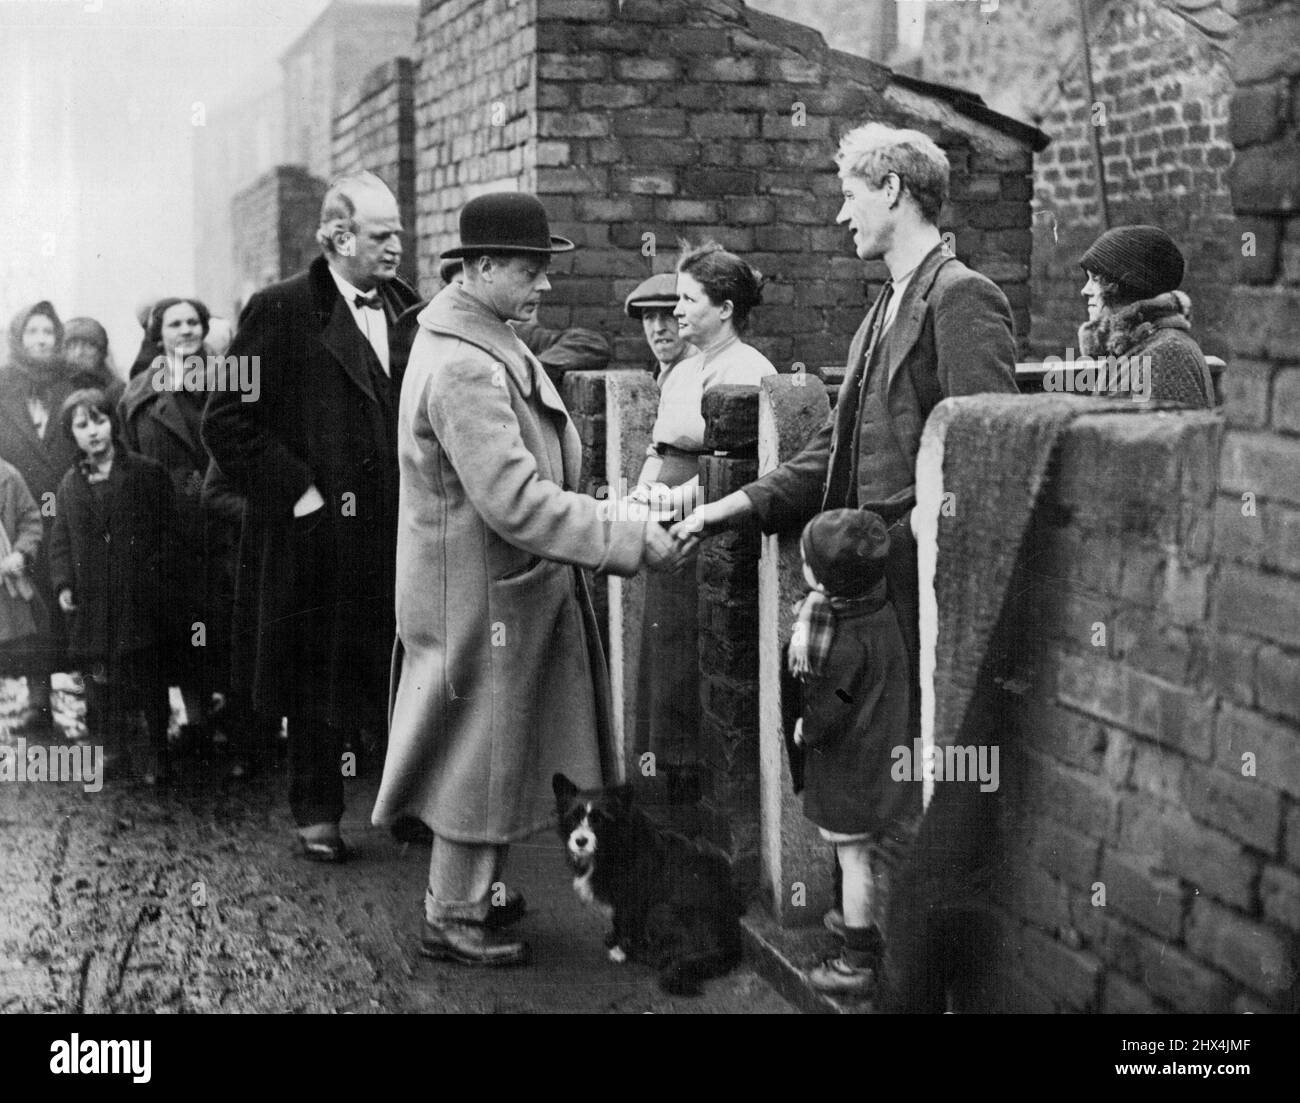 The abdication of Edward VIII from the English Throne just before World War II was the result of a combination of some of the most curious political forces in modern English history. April 14, 1936. Stock Photo